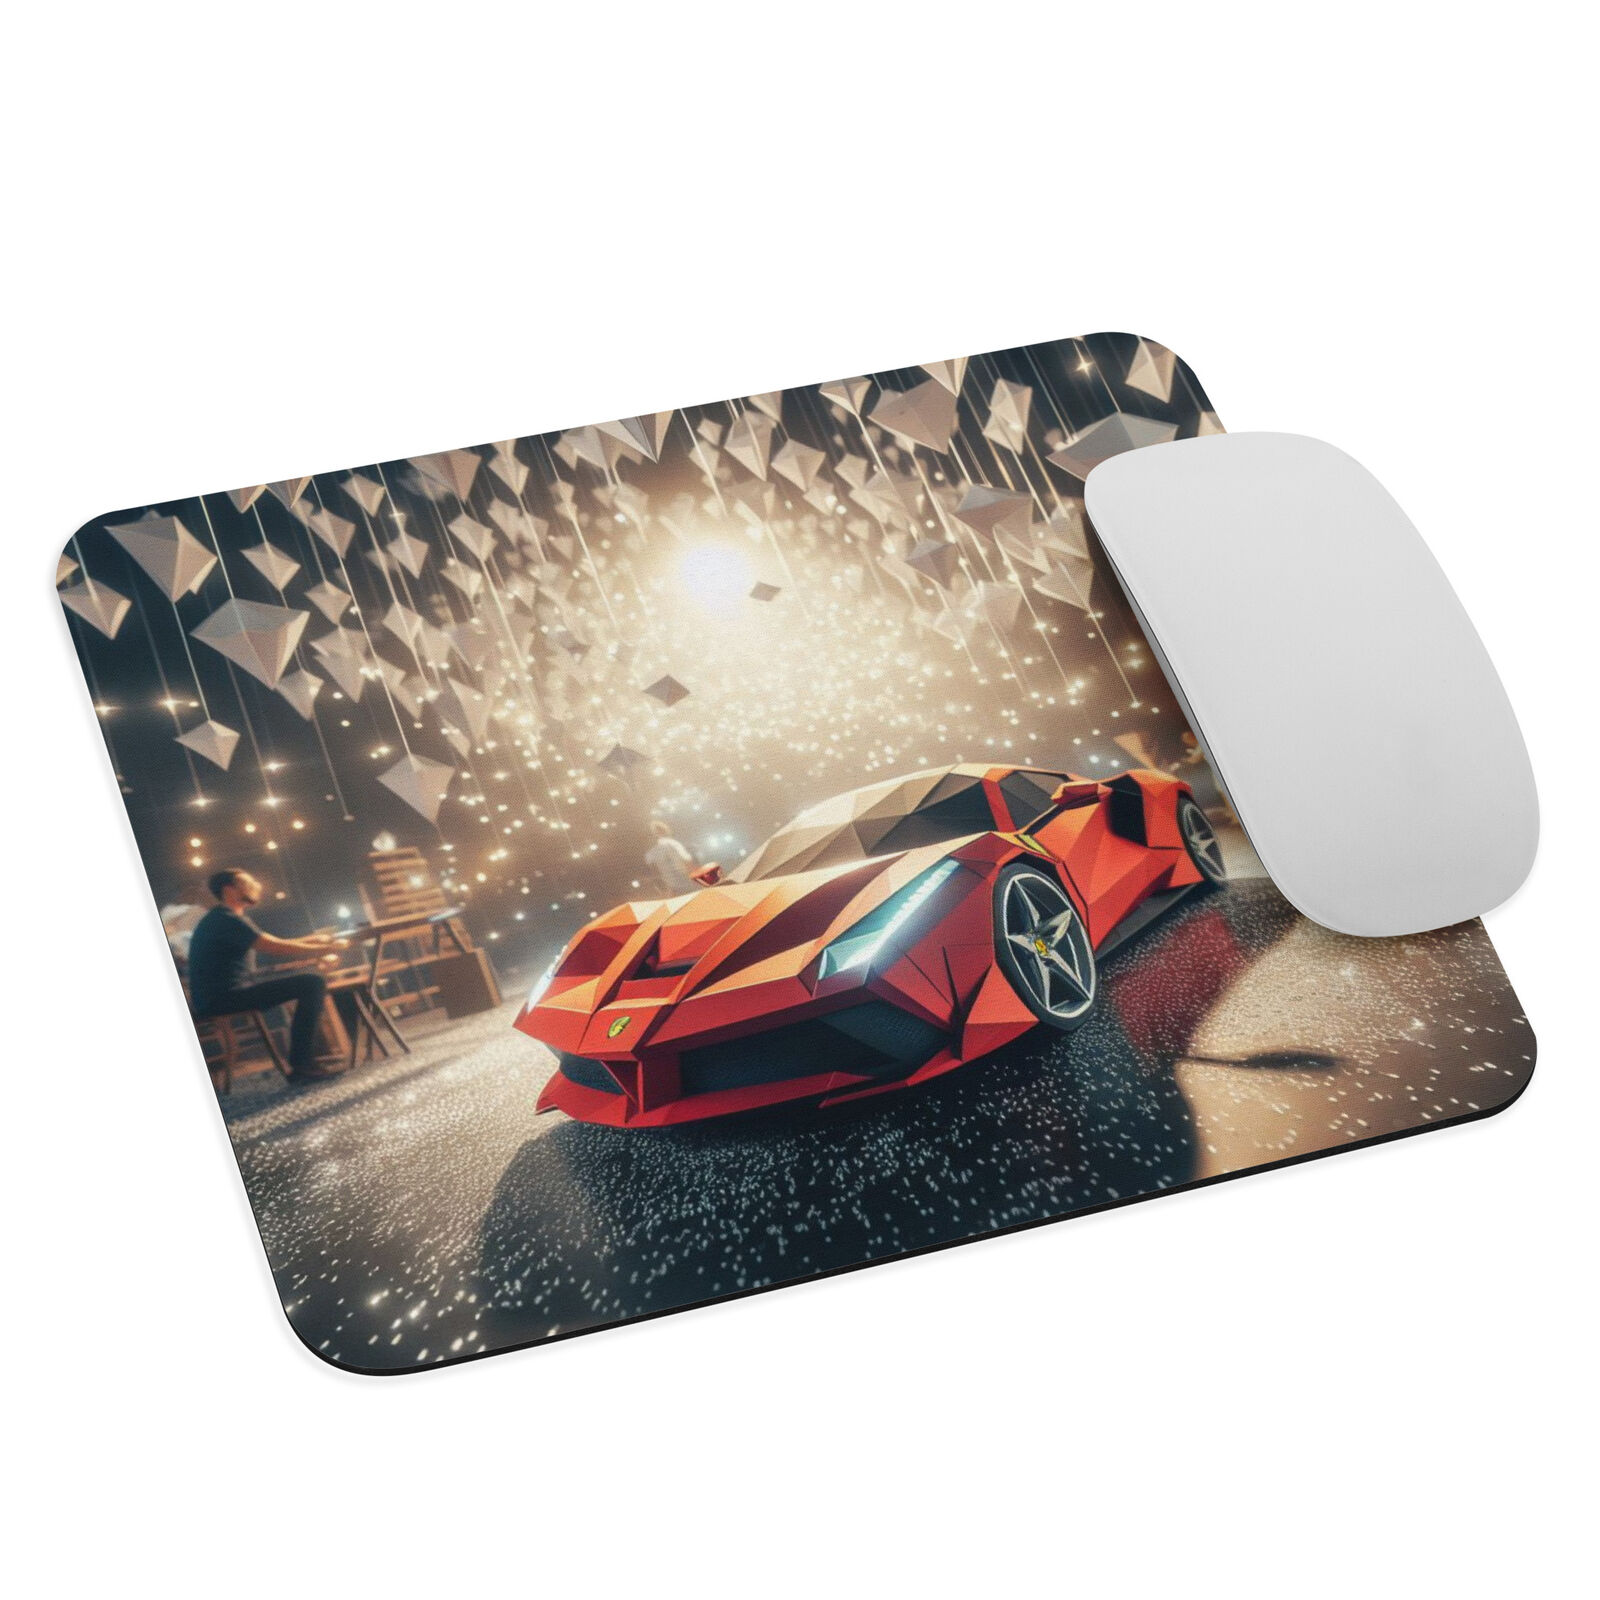 Mouse pad origami voiture